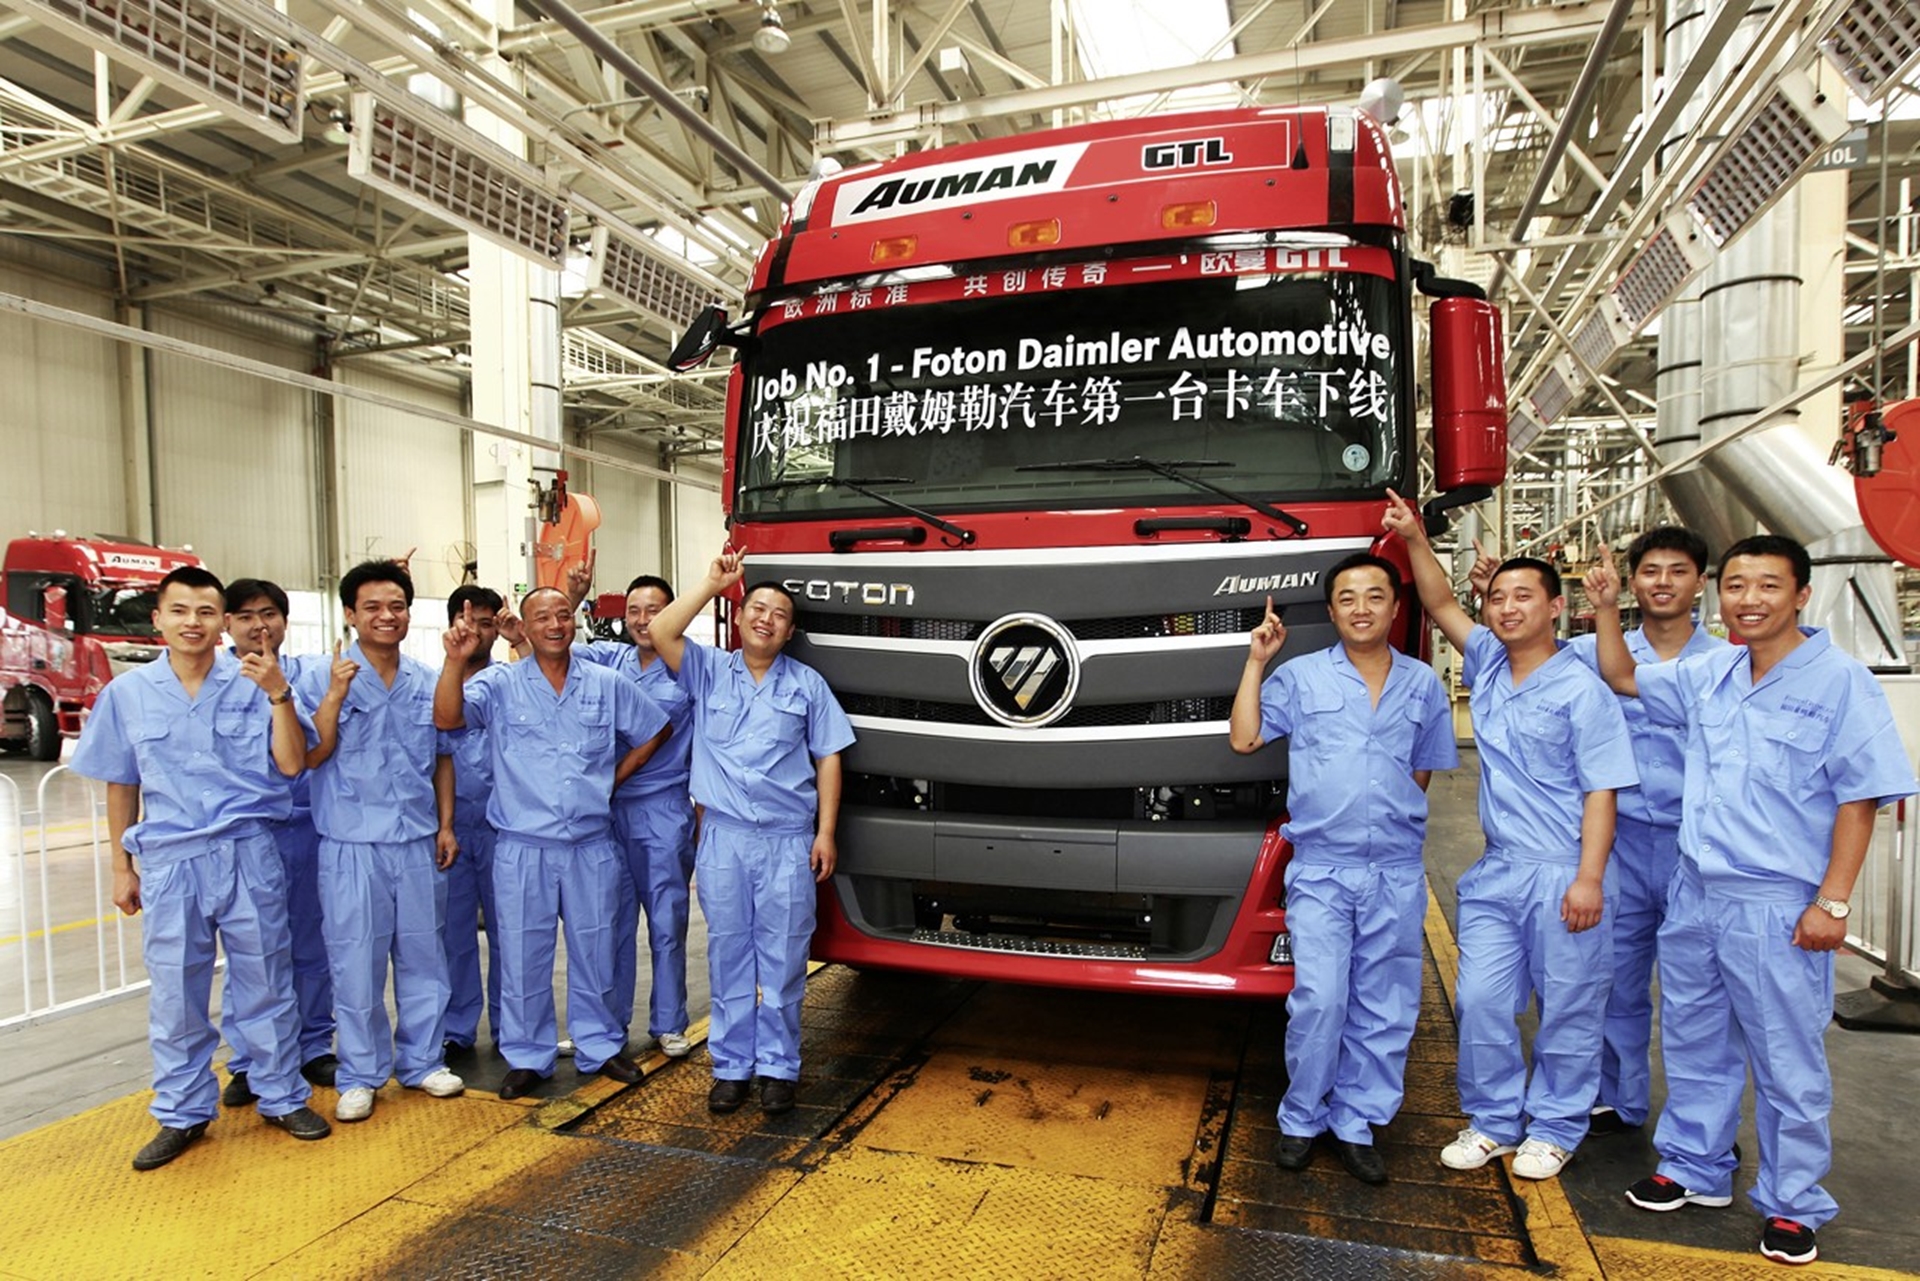 Joint venture between Daimler AG and Chinese truck maker Foton